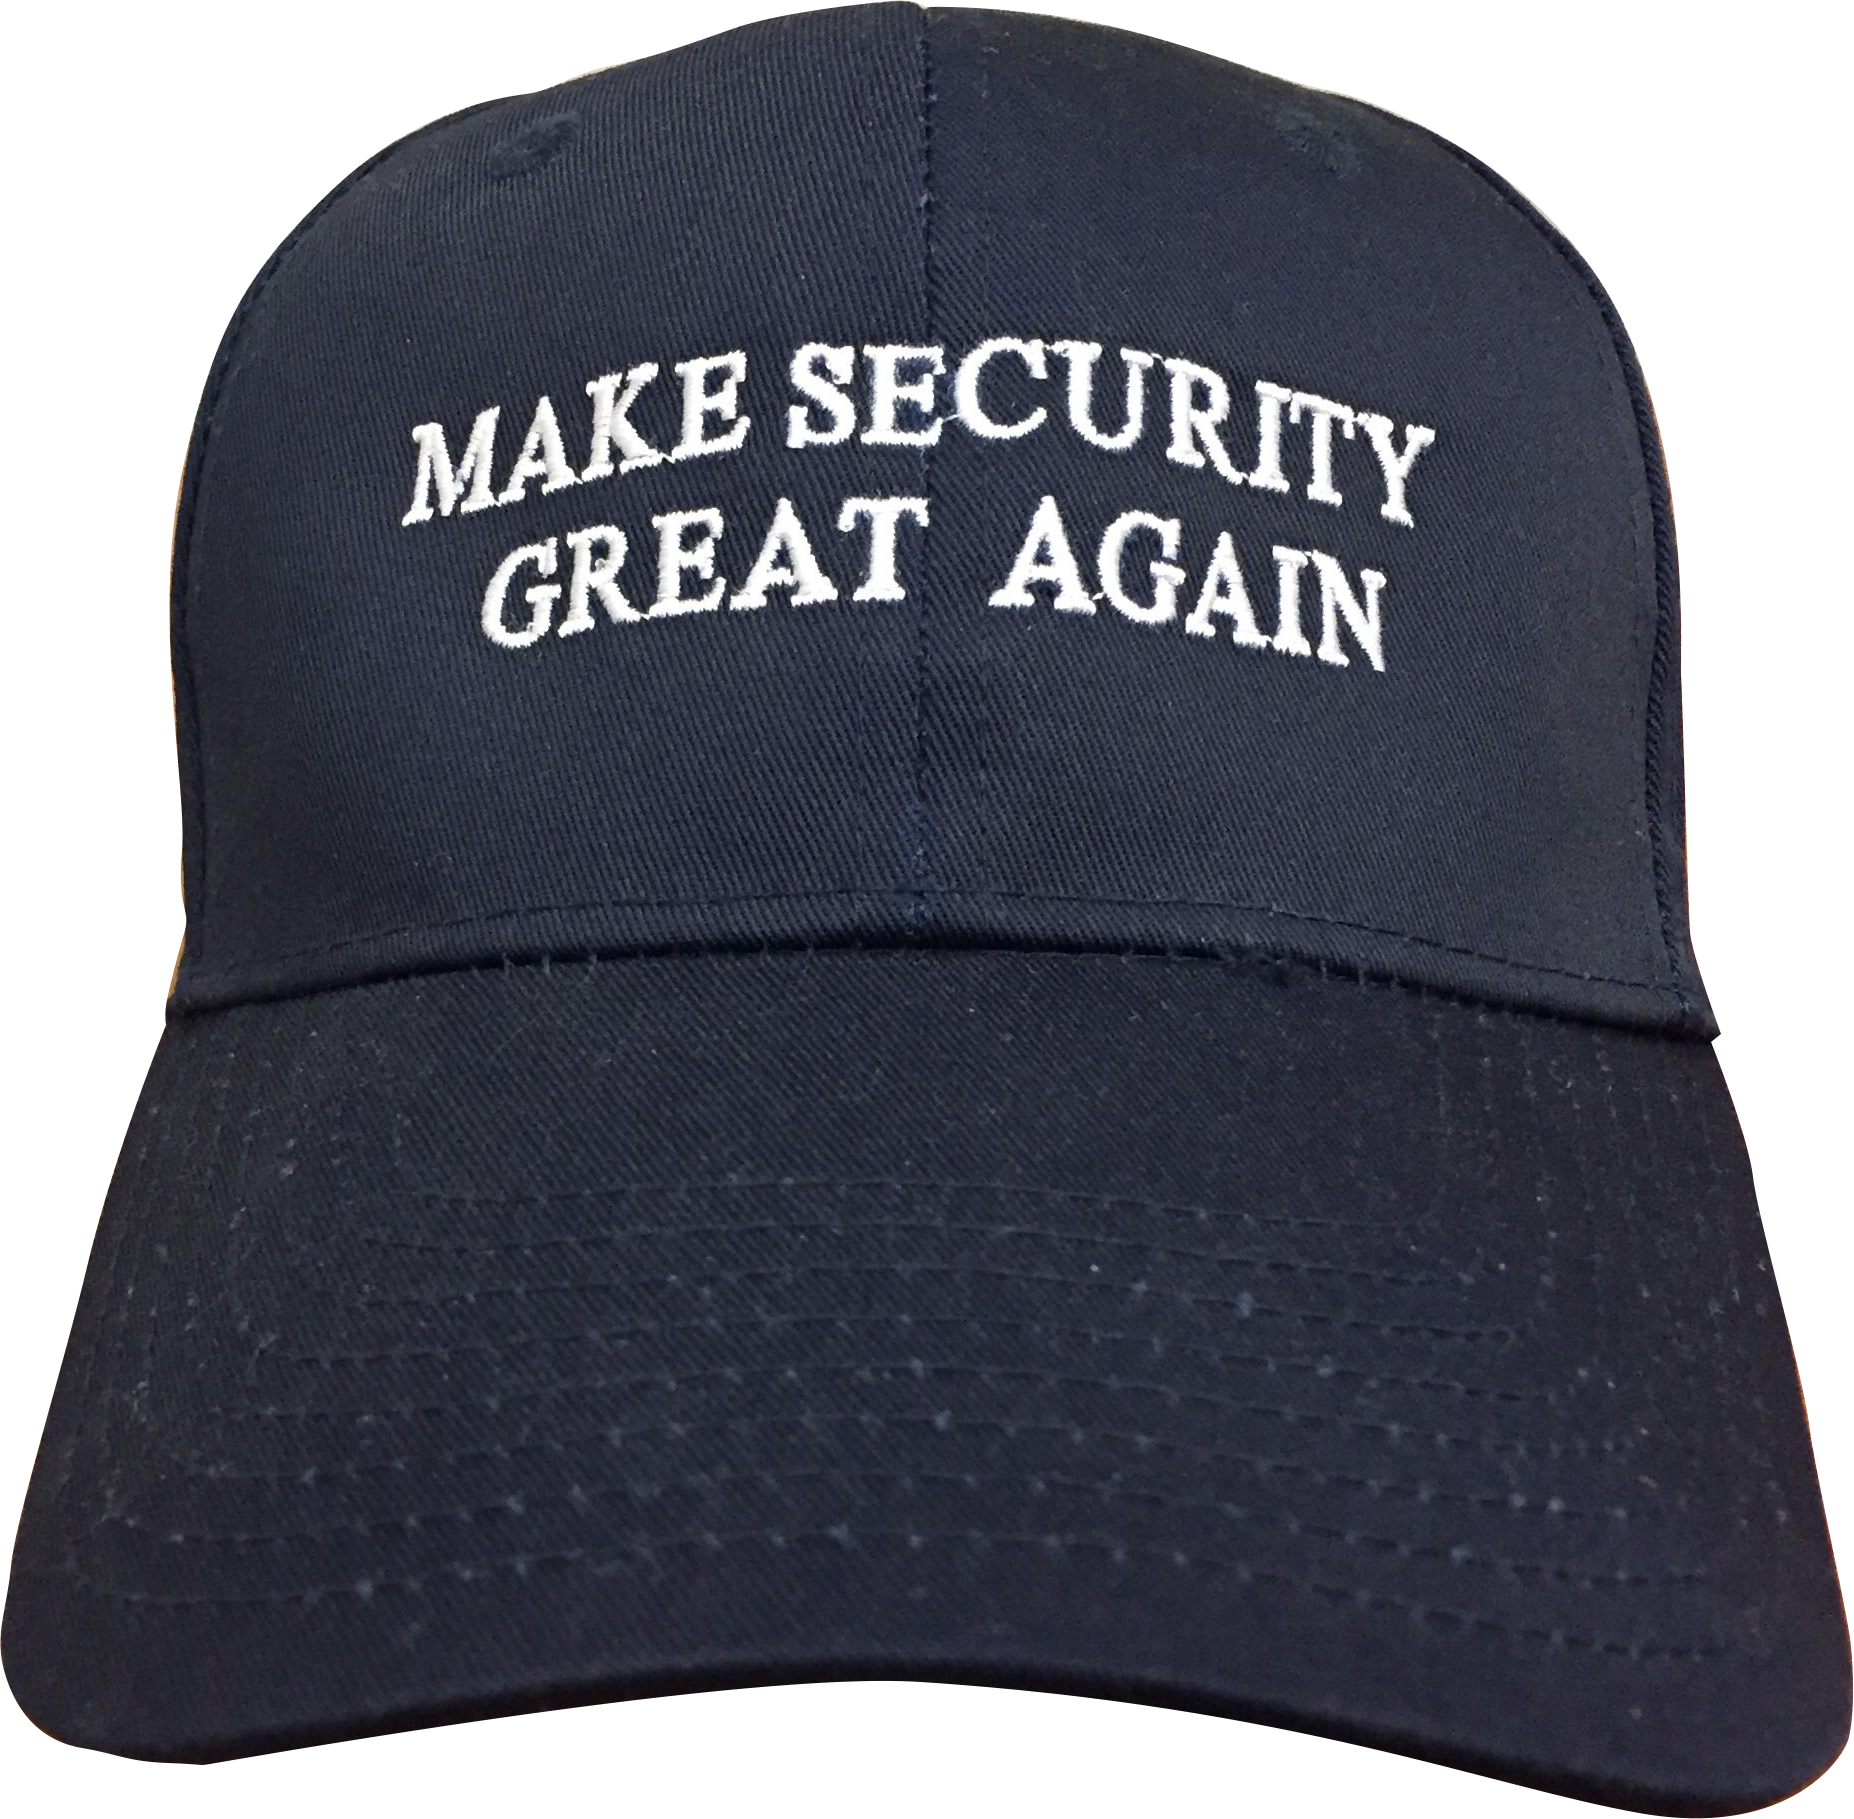 Maxxess souvenier cap with embroidered "Make Security Great Again"